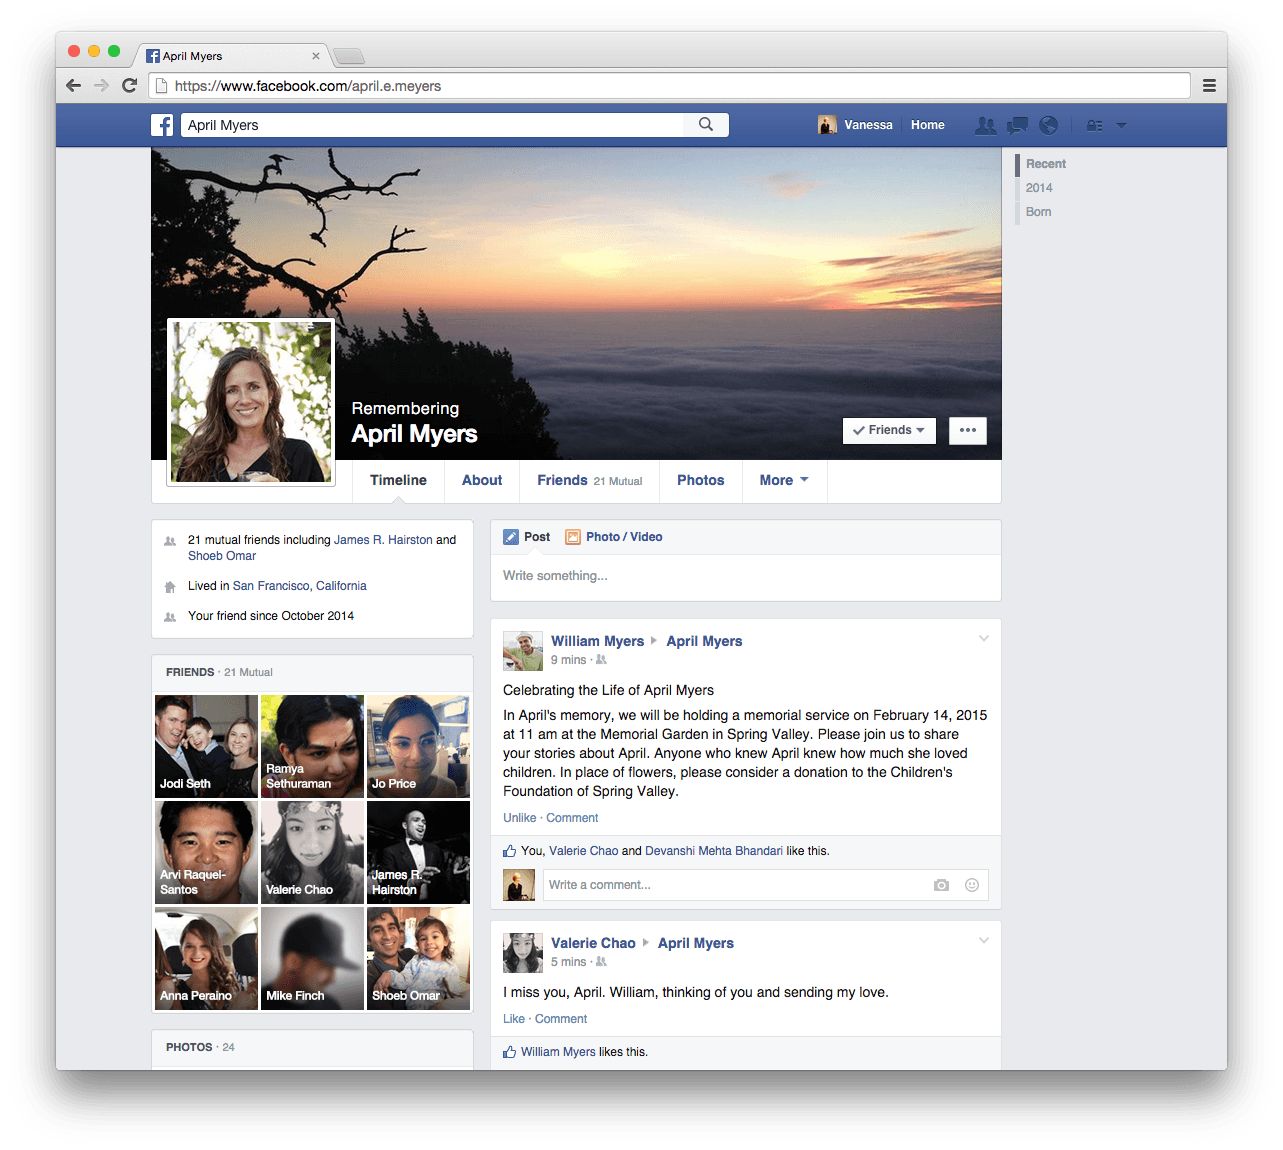 Facebook Legacy Contact Allows You To Choose The Way To Manage Your Account After You Die